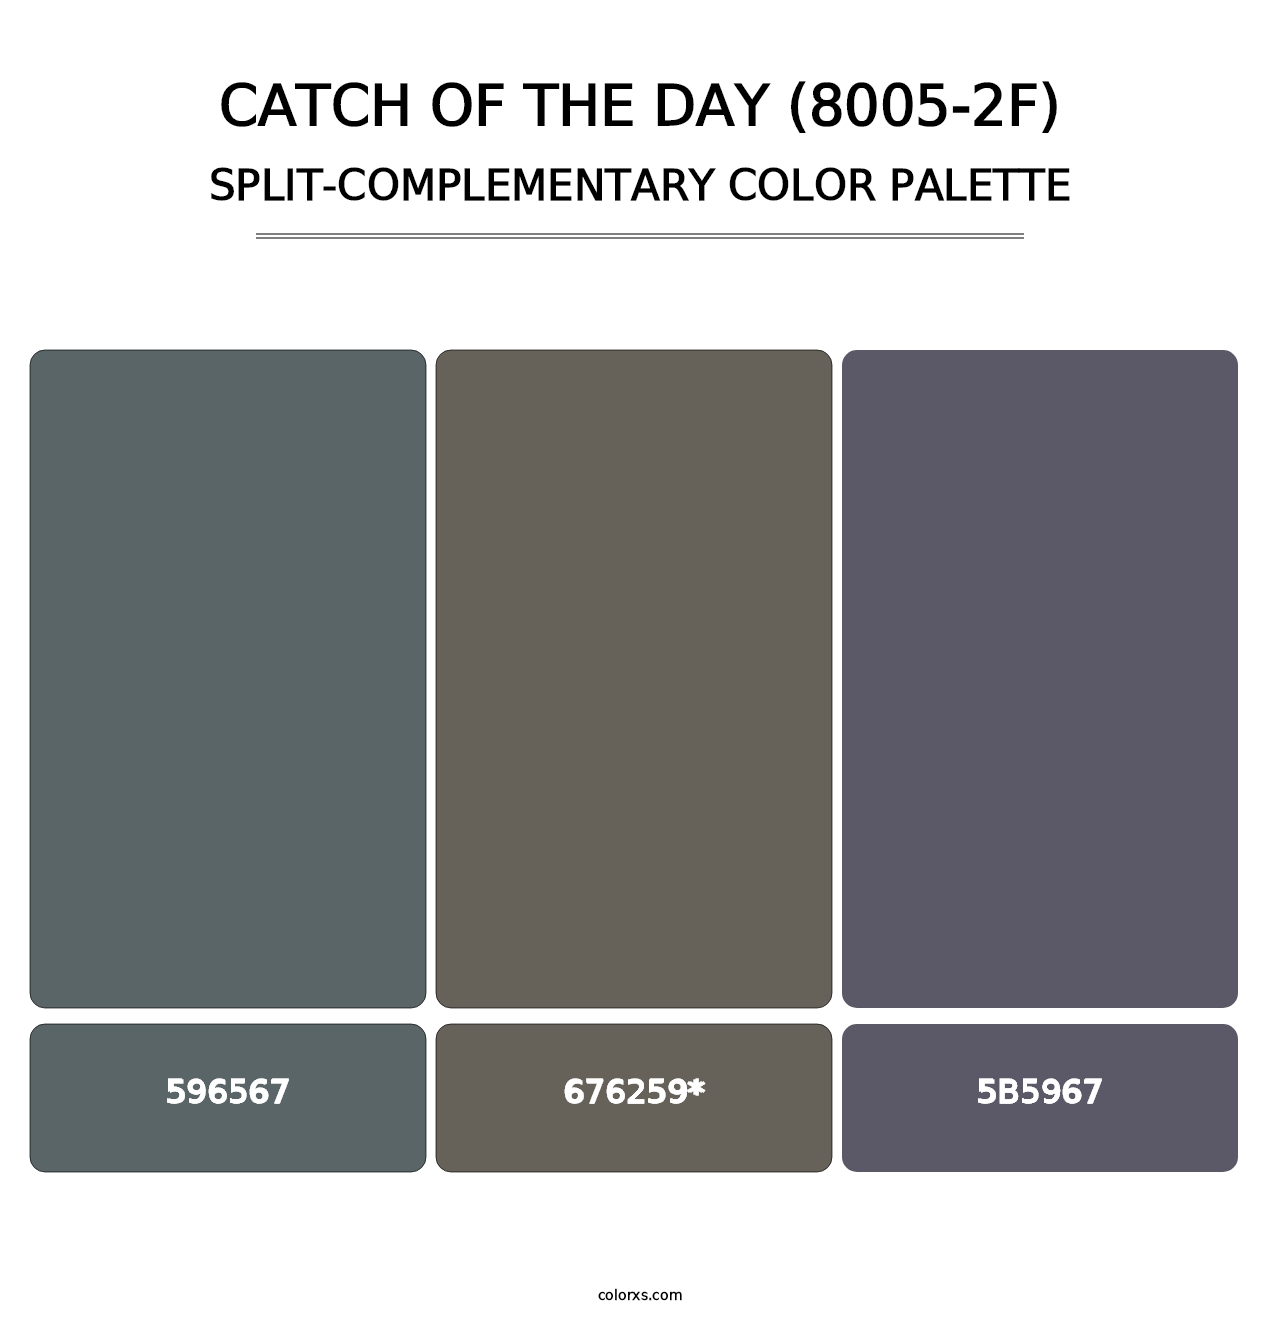 Catch of the Day (8005-2F) - Split-Complementary Color Palette